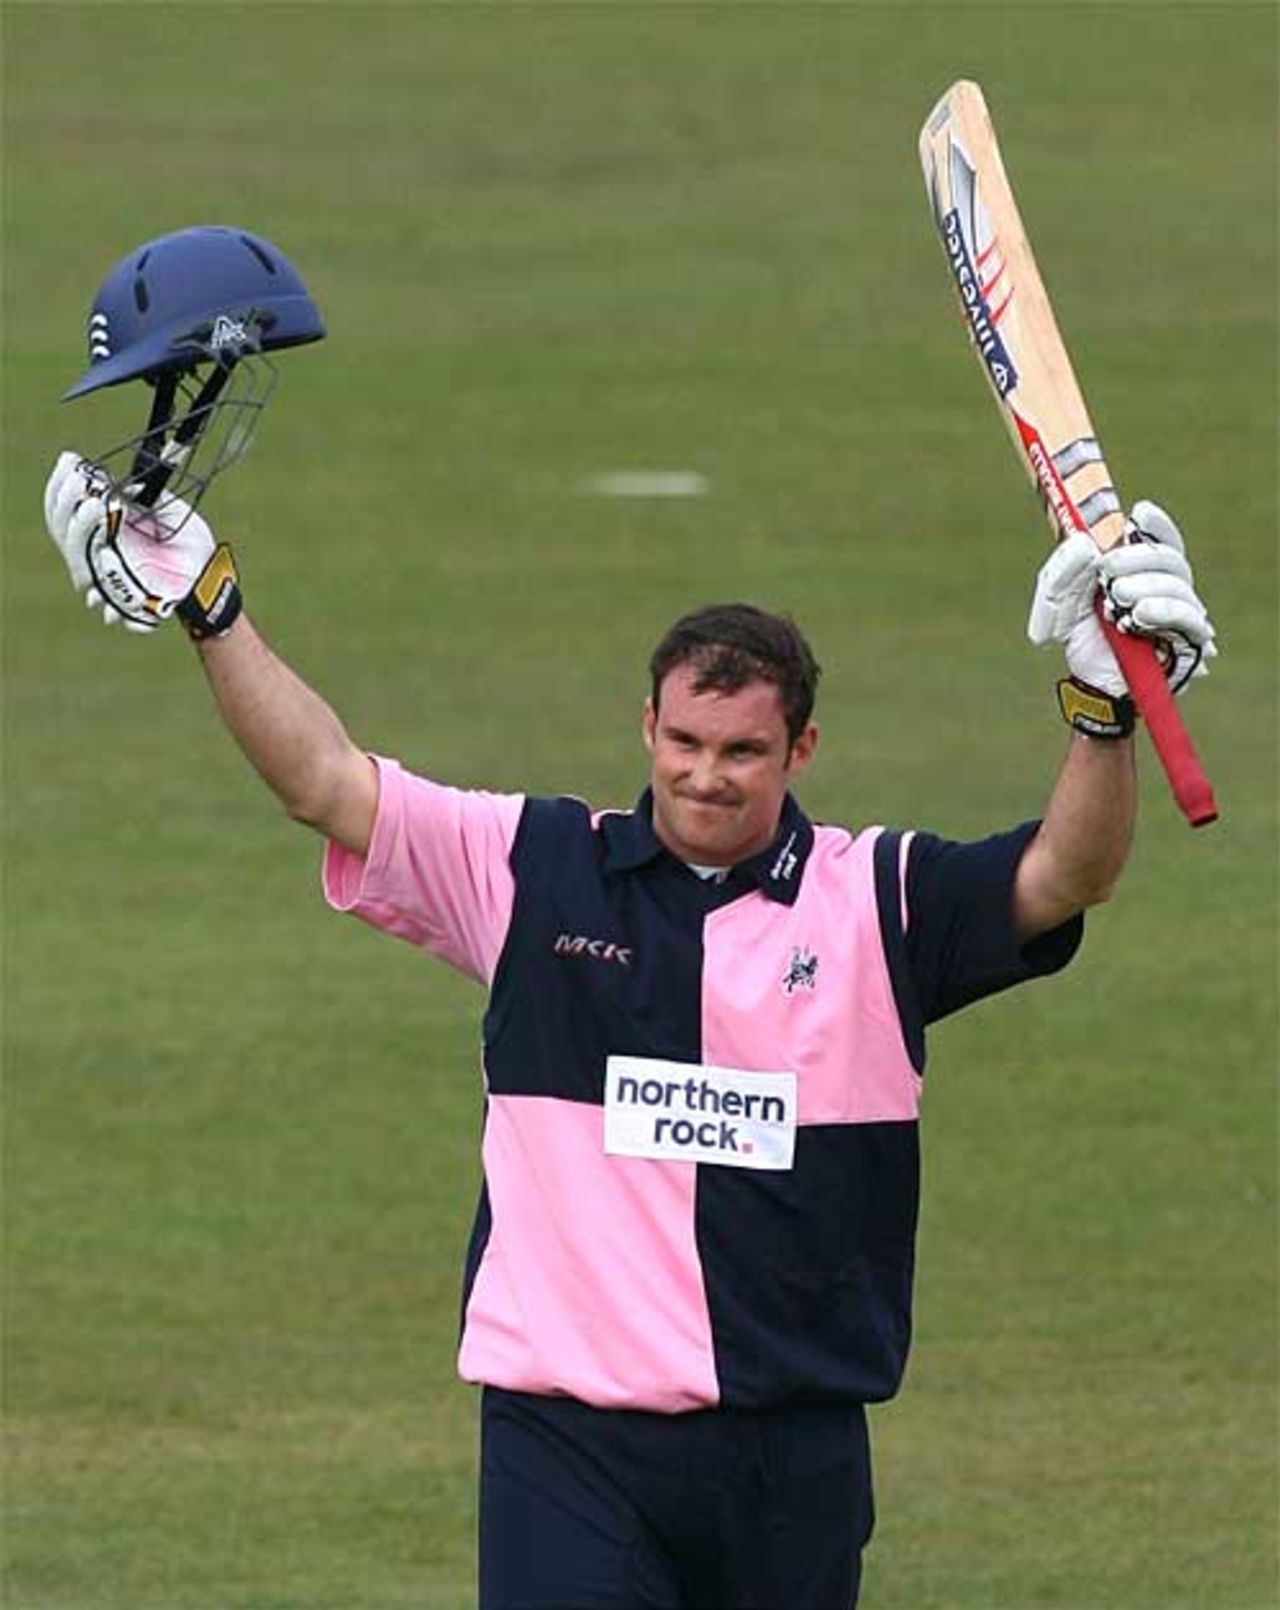 Andrew Strauss celebrates his century, which came off 90 balls, Surrey v Middlesex, Friends Provident Trophy, The Oval, April 20, 2008